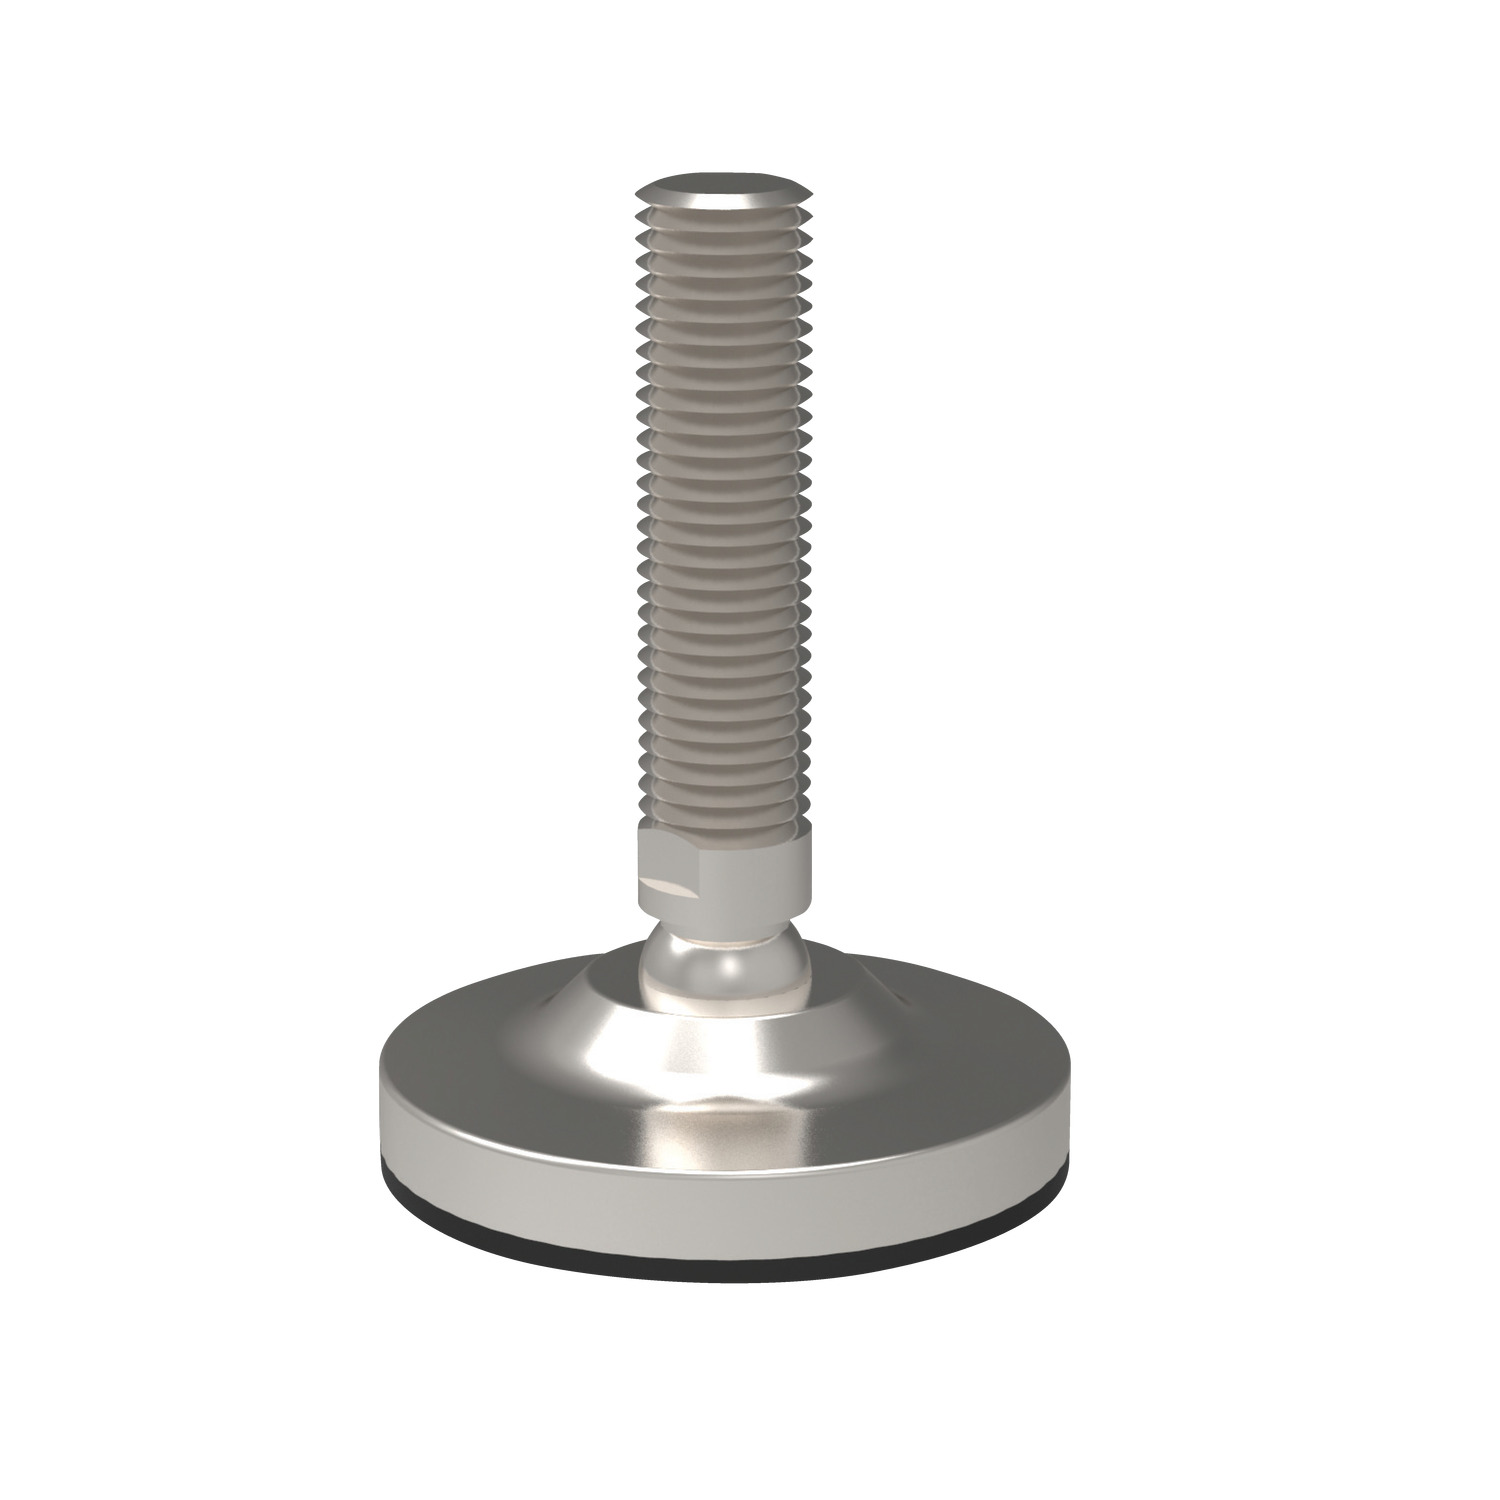 Levelling Feet Swivel levelling feet made from stainless steel AISI 304 or AISI316 on request. Thread bolt allows for up to 30° articulation  of the foot.